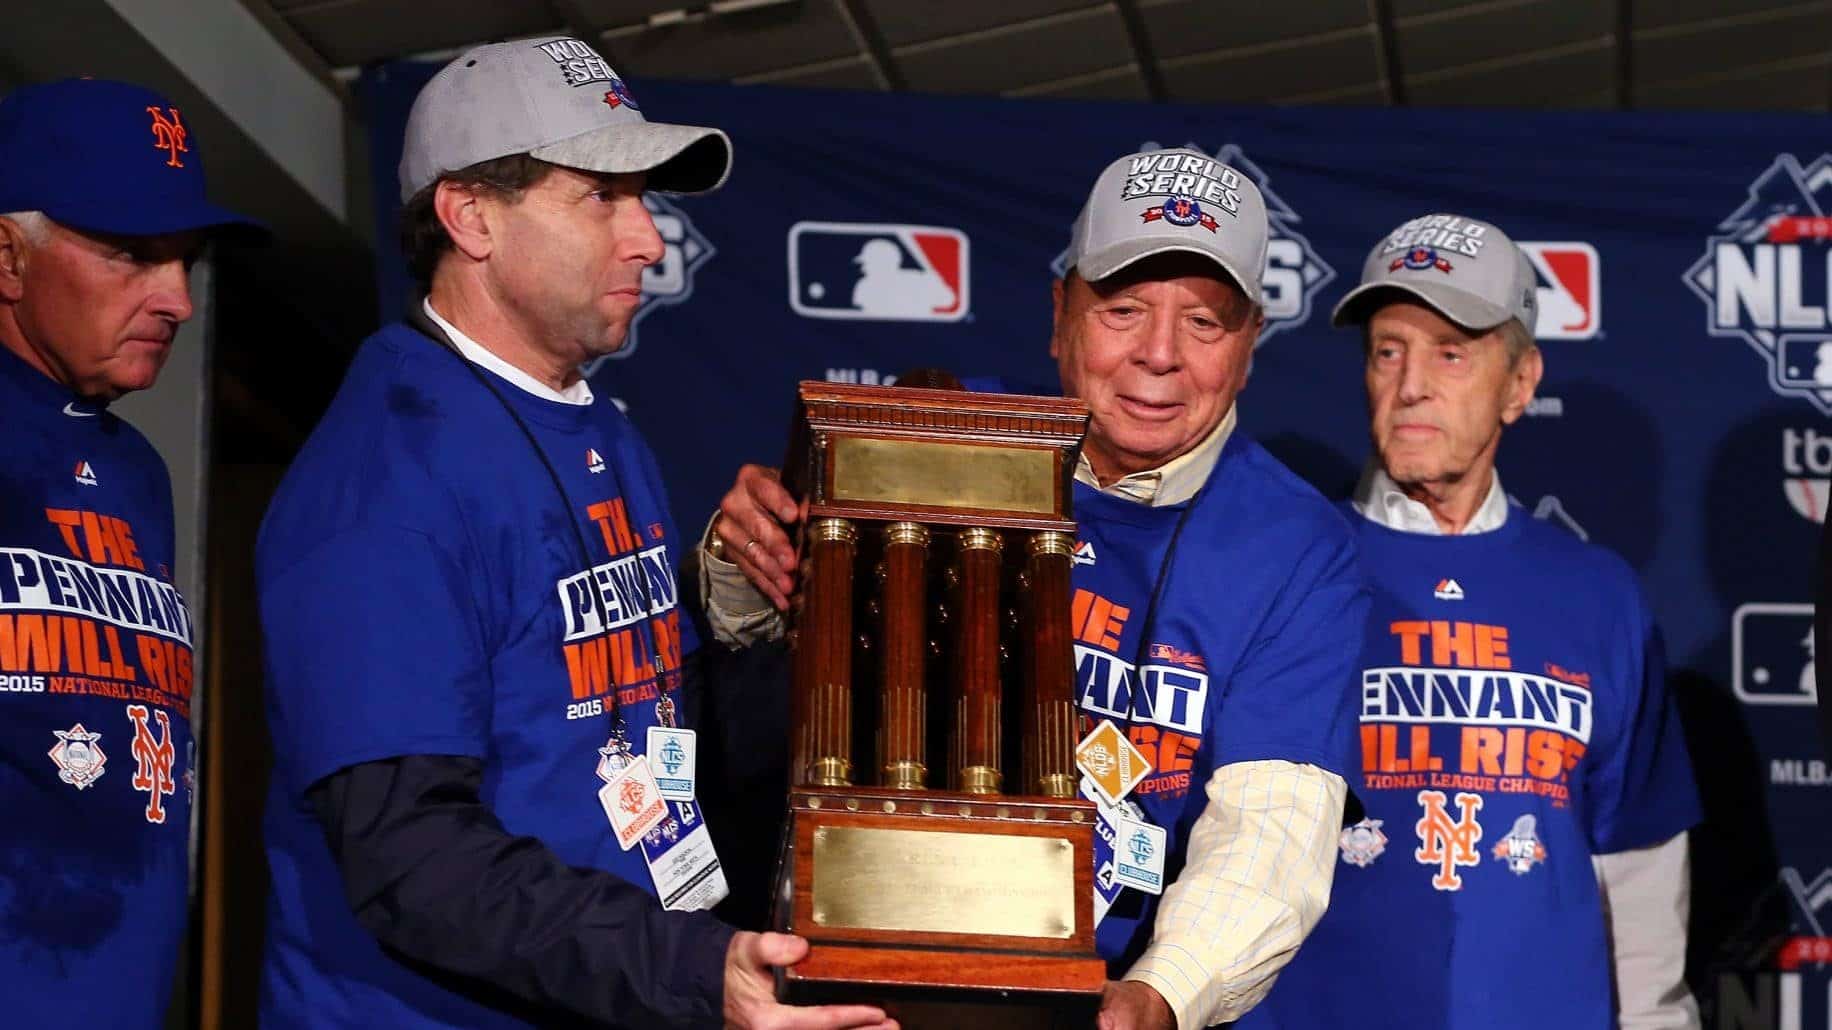 CHICAGO, IL - OCTOBER 21: (L-R) Chief Operating Officer Jeff Wilpon, Chief Executive Officer Saul Katz and Owner Fred Wilpon of the New York Mets pose with the NLCS trophy after defeating the Chicago Cubs in game four of the 2015 MLB National League Championship Series at Wrigley Field on October 21, 2015 in Chicago, Illinois. The Mets defeated the Cubs with a score of 8 to 3 to sweep the Championship Series.